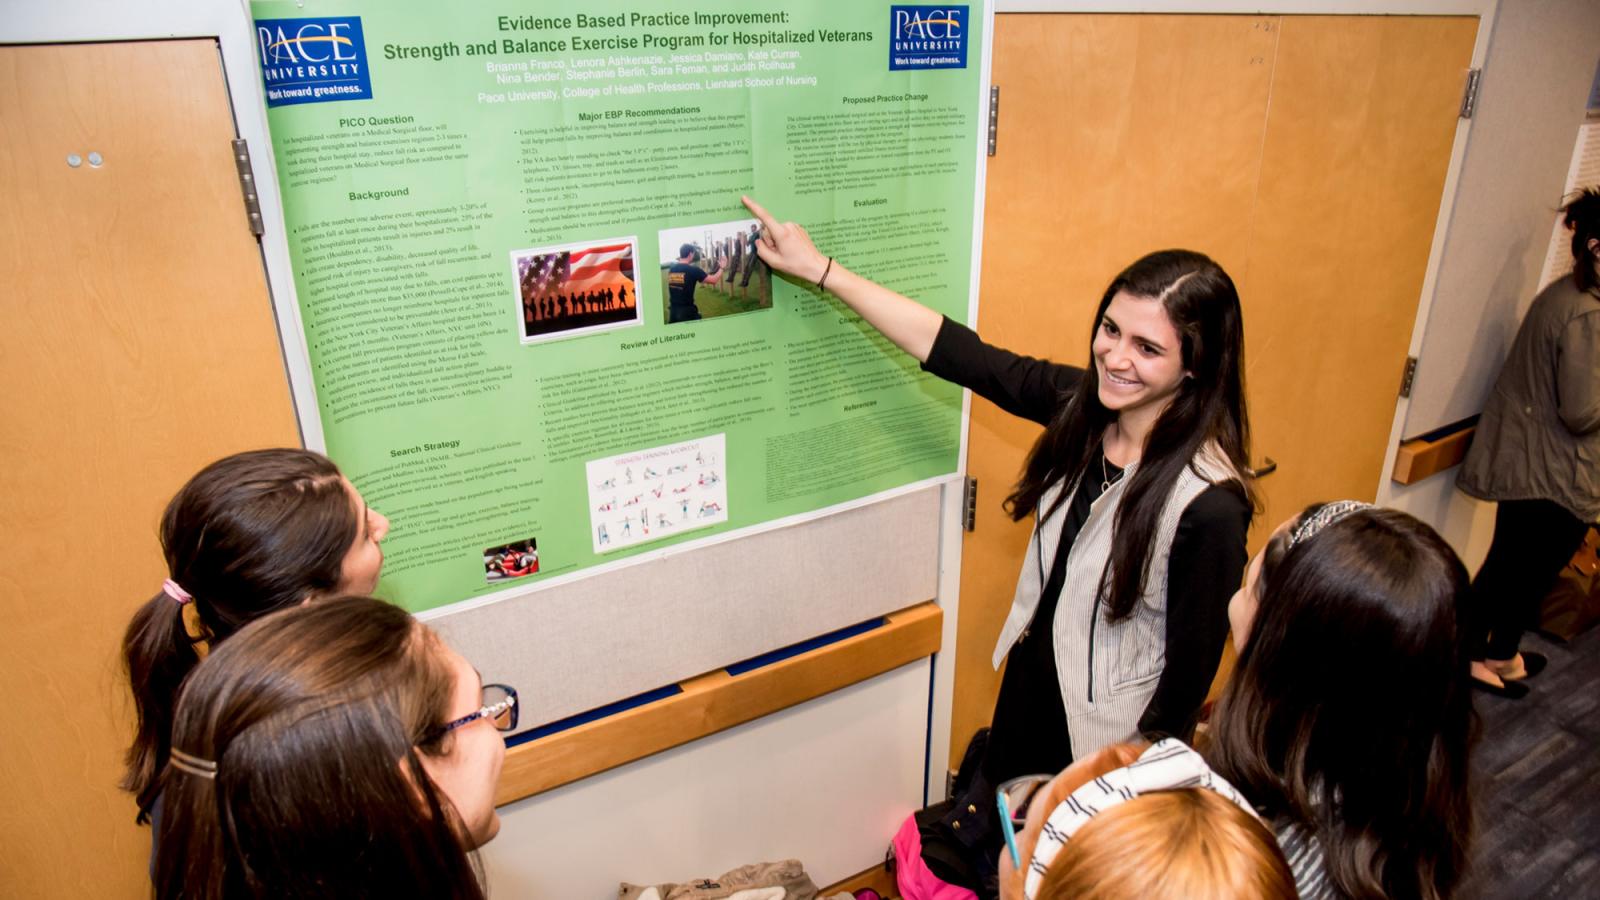 College of Health Profession's student presenting her research to other students.